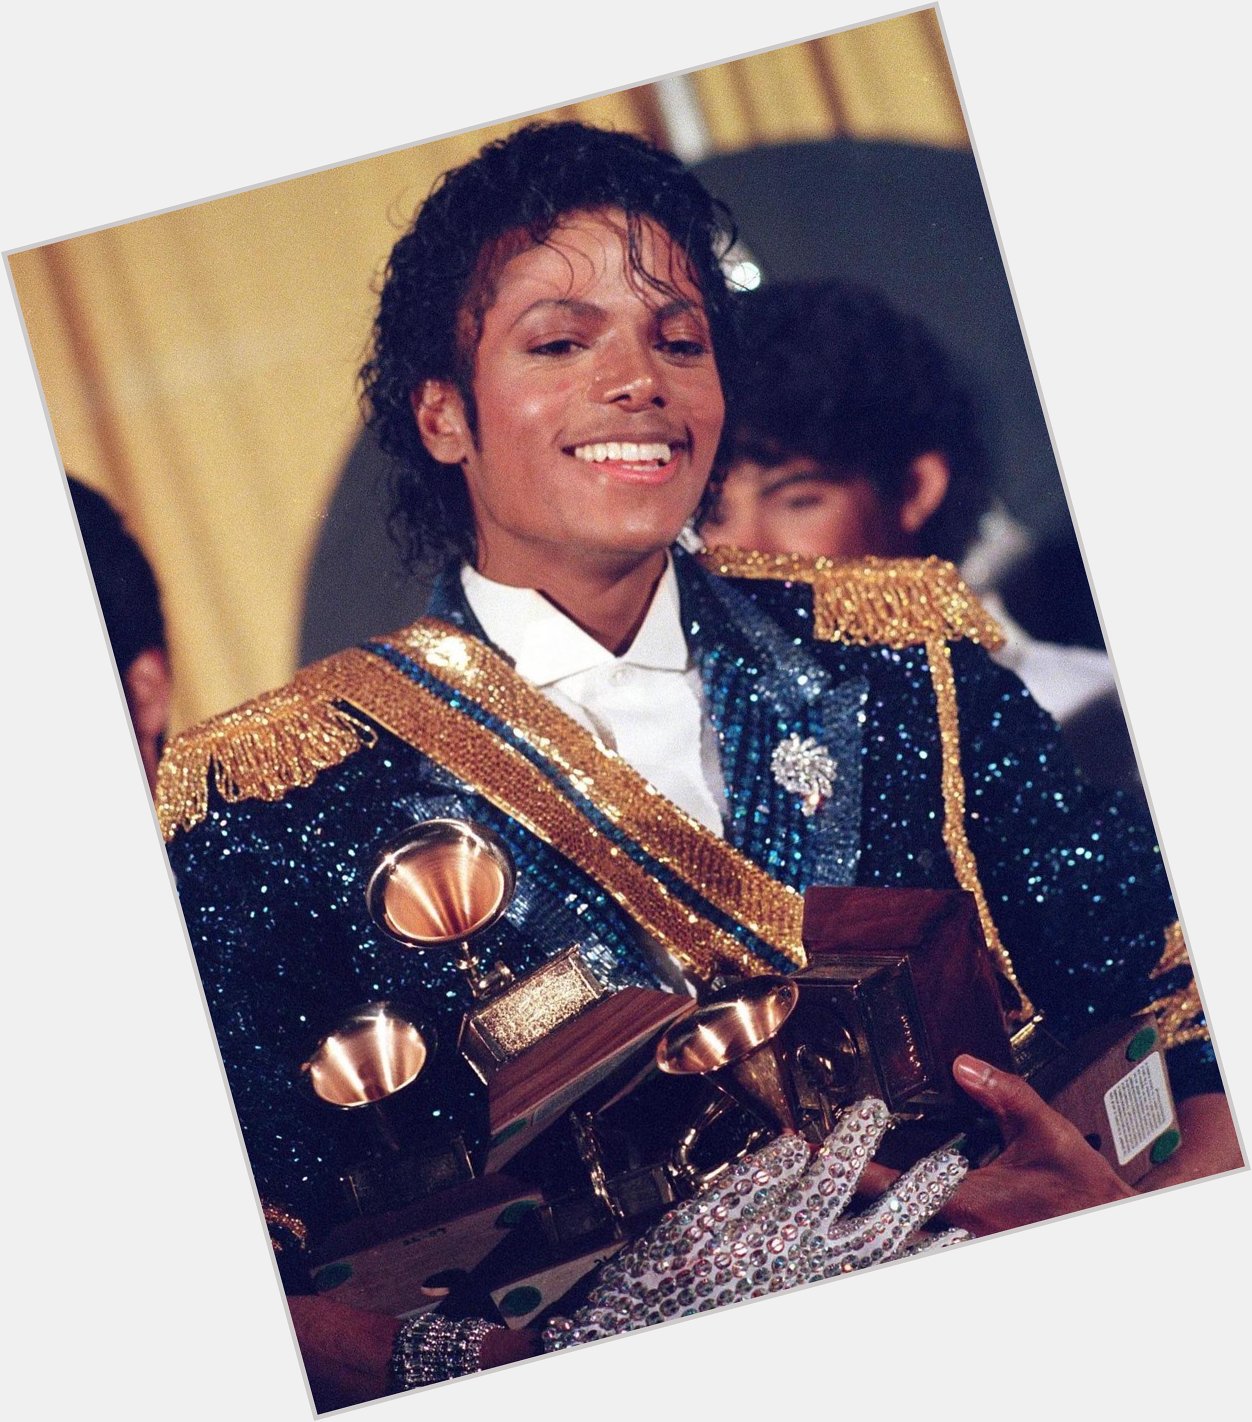 Michael Jackson would have turned 64 today. Happy Birthday to the King of Pop.  